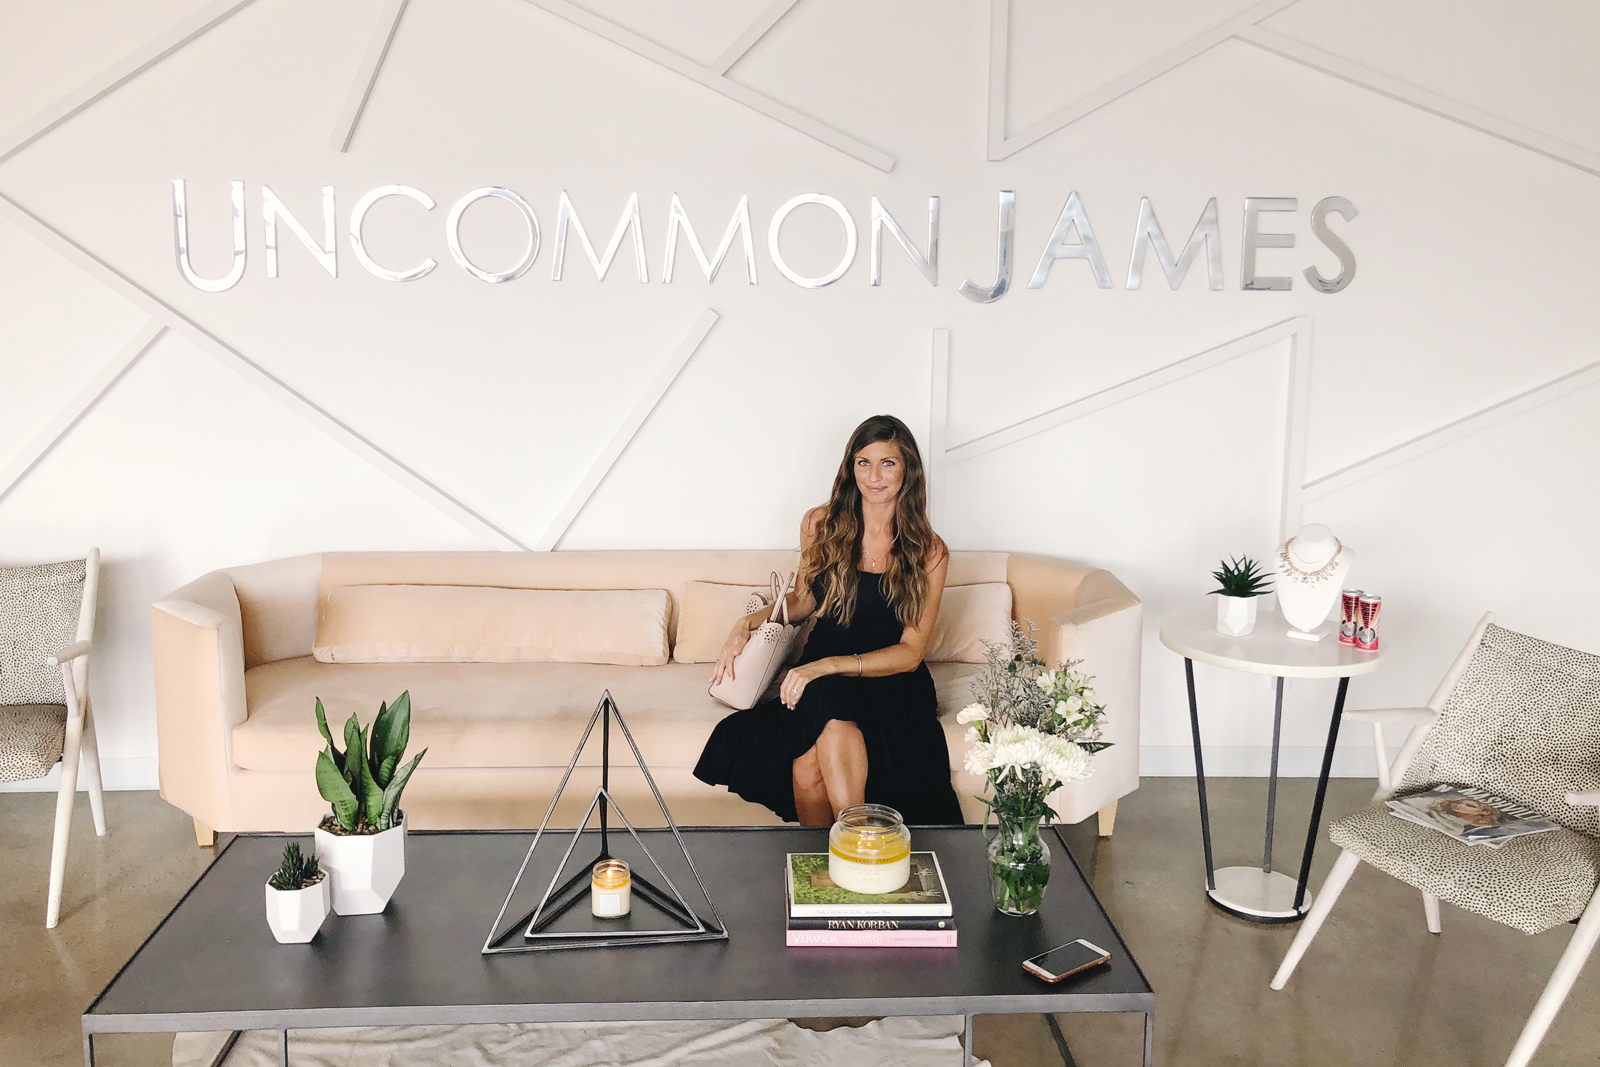 an afternoon at uncommon james!